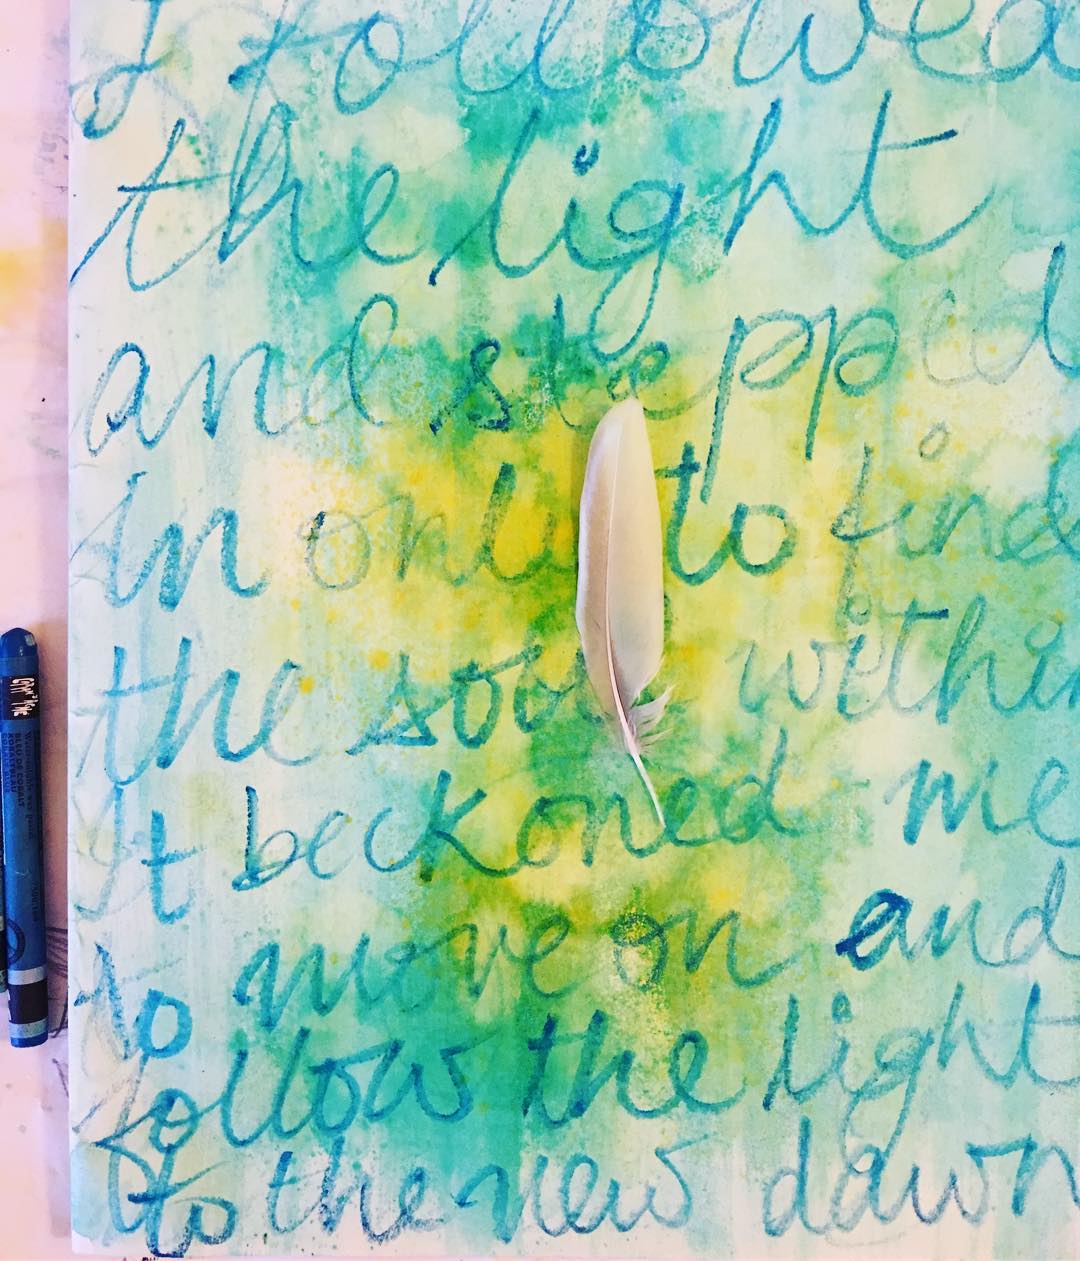 Daily Art Journaling ~ Day 61

I followed the light and stepped in only to find the soul within. It beckoned me to move on and follow the light to the new dawn.